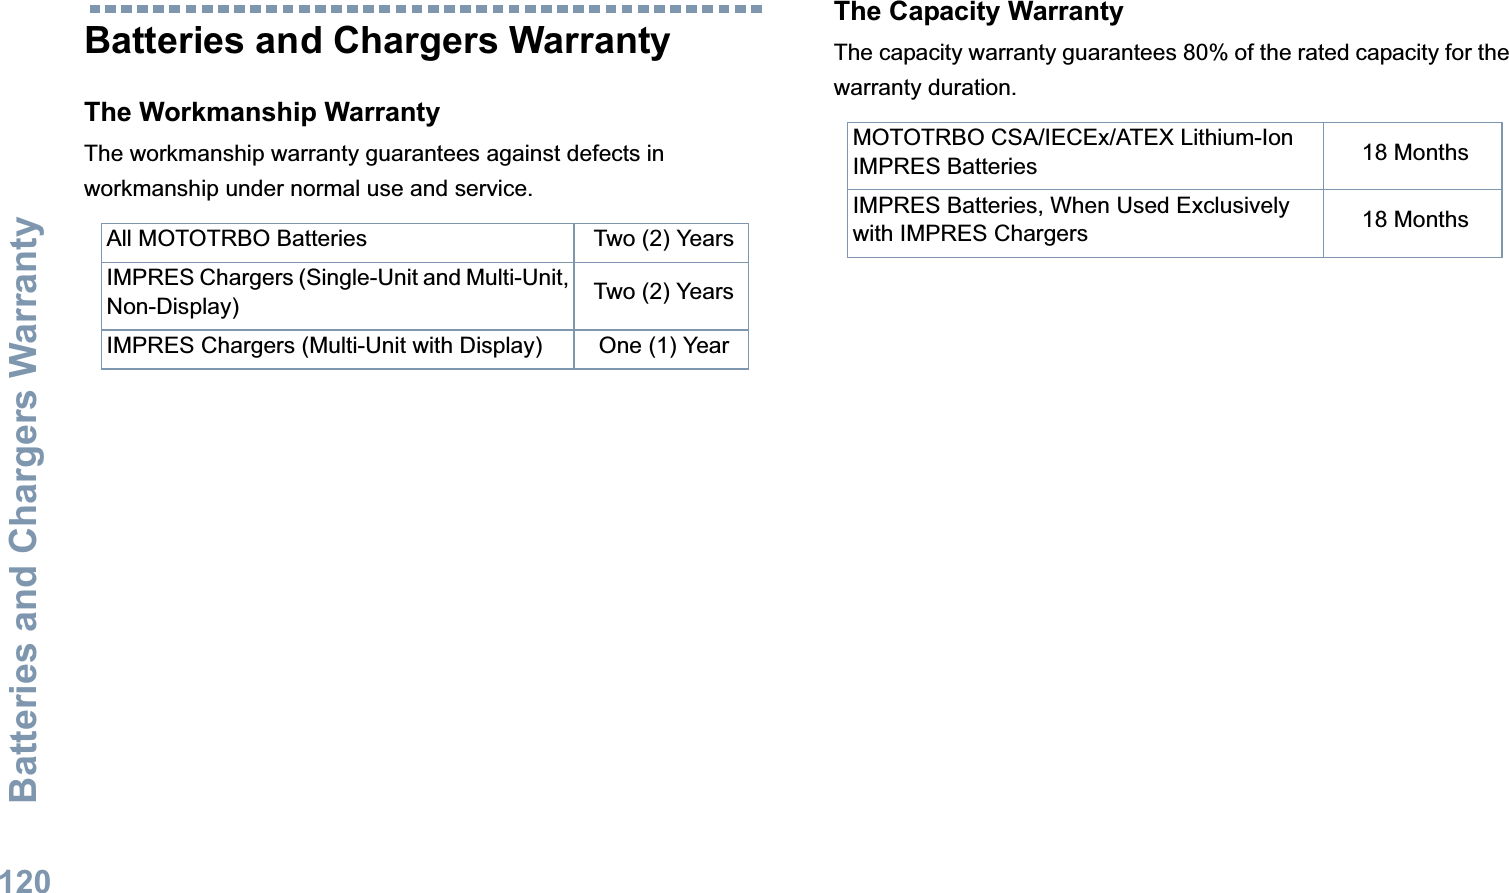 Batteries and Chargers WarrantyEnglish120Batteries and Chargers WarrantyThe Workmanship Warranty The workmanship warranty guarantees against defects in workmanship under normal use and service.The Capacity WarrantyThe capacity warranty guarantees 80% of the rated capacity for the warranty duration.All MOTOTRBO Batteries Two (2) YearsIMPRES Chargers (Single-Unit and Multi-Unit, Non-Display) Two (2) YearsIMPRES Chargers (Multi-Unit with Display) One (1) YearMOTOTRBO CSA/IECEx/ATEX Lithium-Ion IMPRES Batteries 18 MonthsIMPRES Batteries, When Used Exclusively with IMPRES Chargers 18 Months